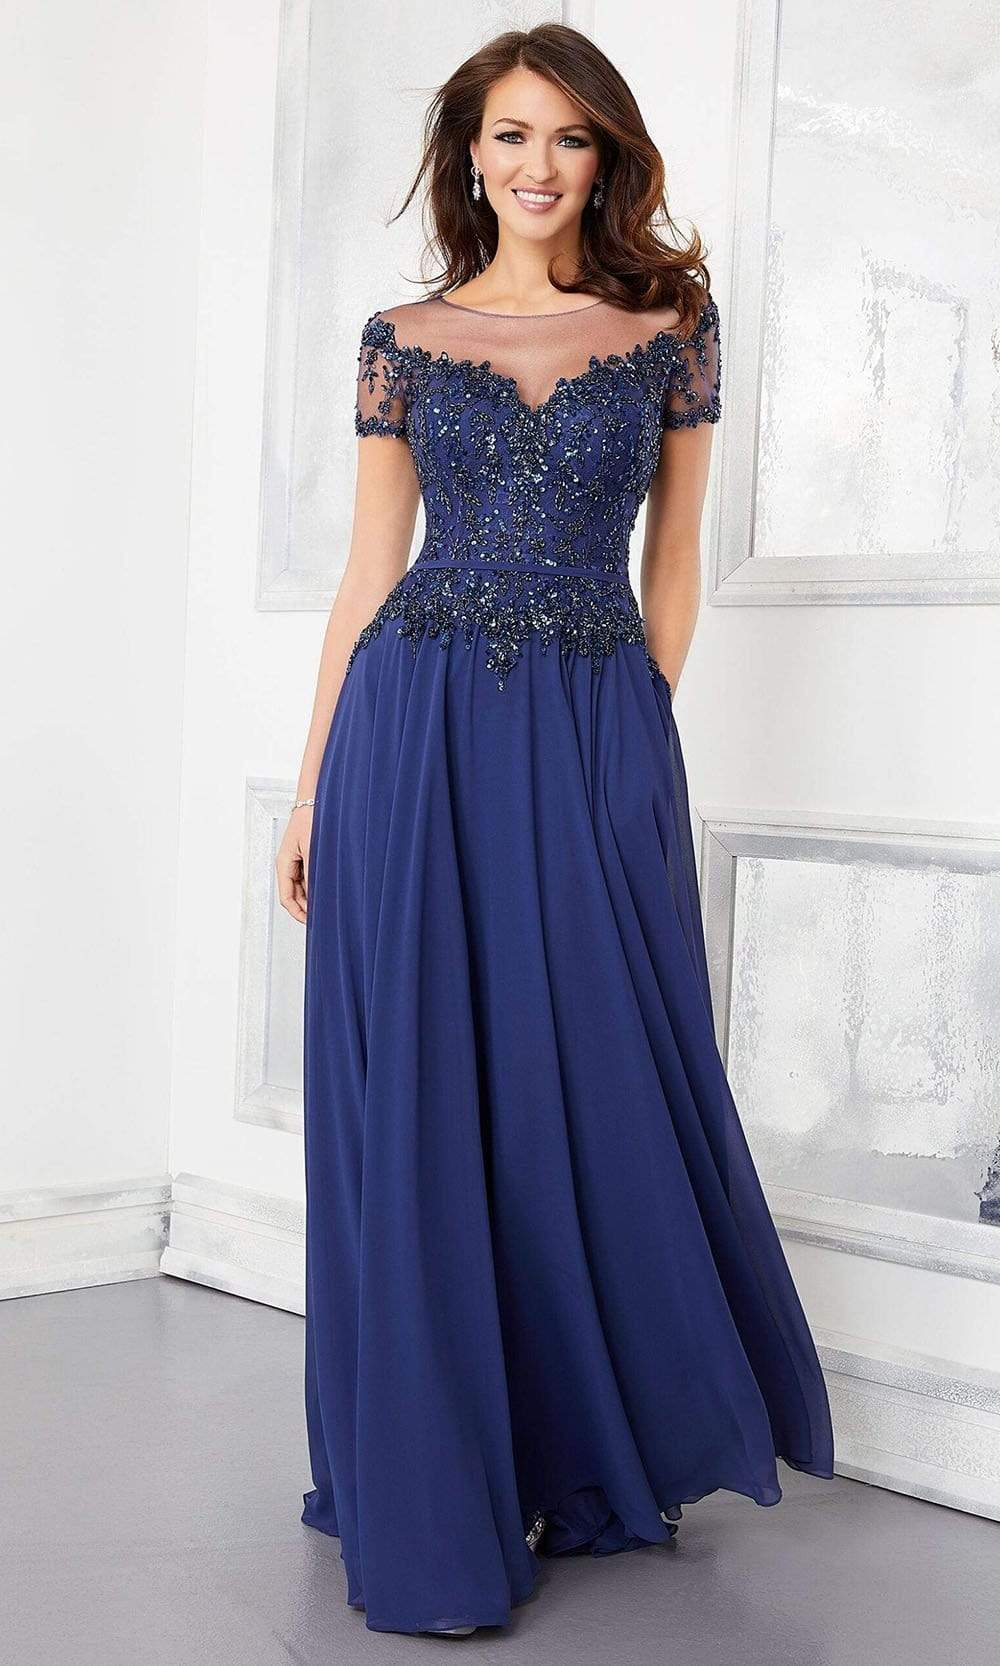 Image of Mori Lee - 72309 Illusion Neckline Crystal Beaded Chiffon A-Line Gown